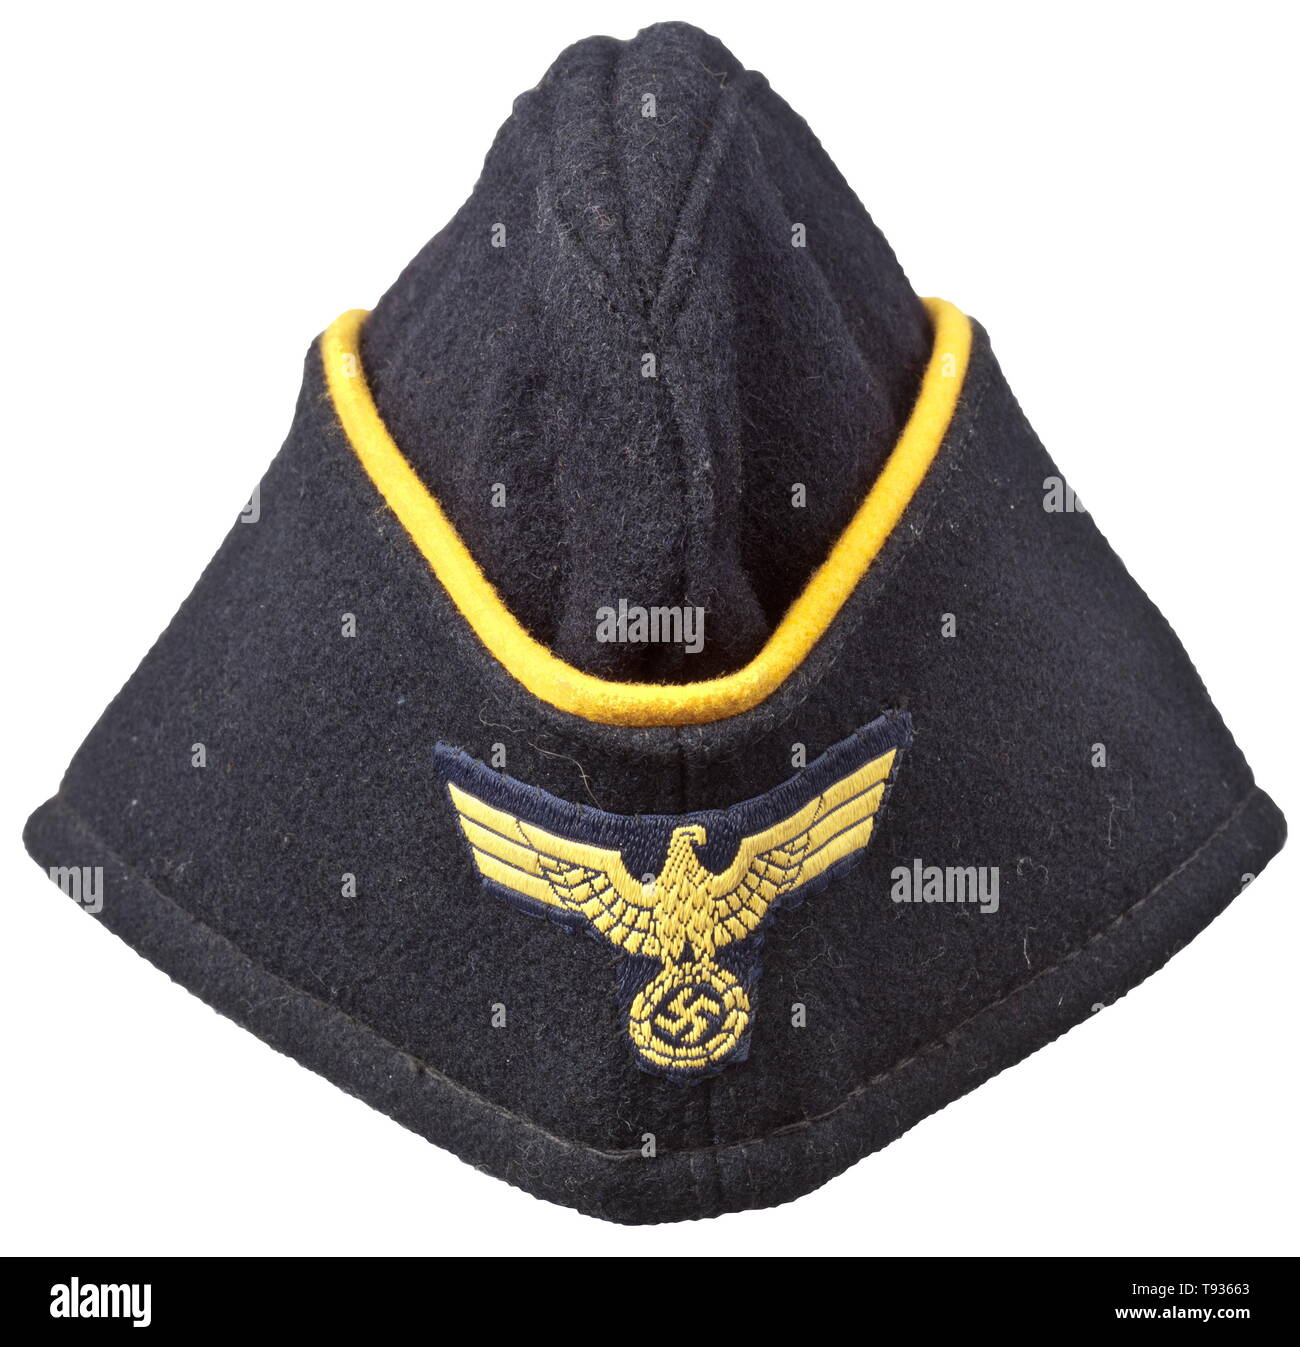 A side cap for naval female auxiliaries Depot piece in navy-blue woollen cloth in the on-board cap cut, continuous yellow wool braid, black inner liner with depot stamping, BeVo weave cap eagle (golden-yellow on dark blue ground). historic, historical, navy, naval forces, military, militaria, branch of service, branches of service, armed forces, armed service, object, objects, stills, clipping, clippings, cut out, cut-out, cut-outs, 20th century, Editorial-Use-Only Stock Photo